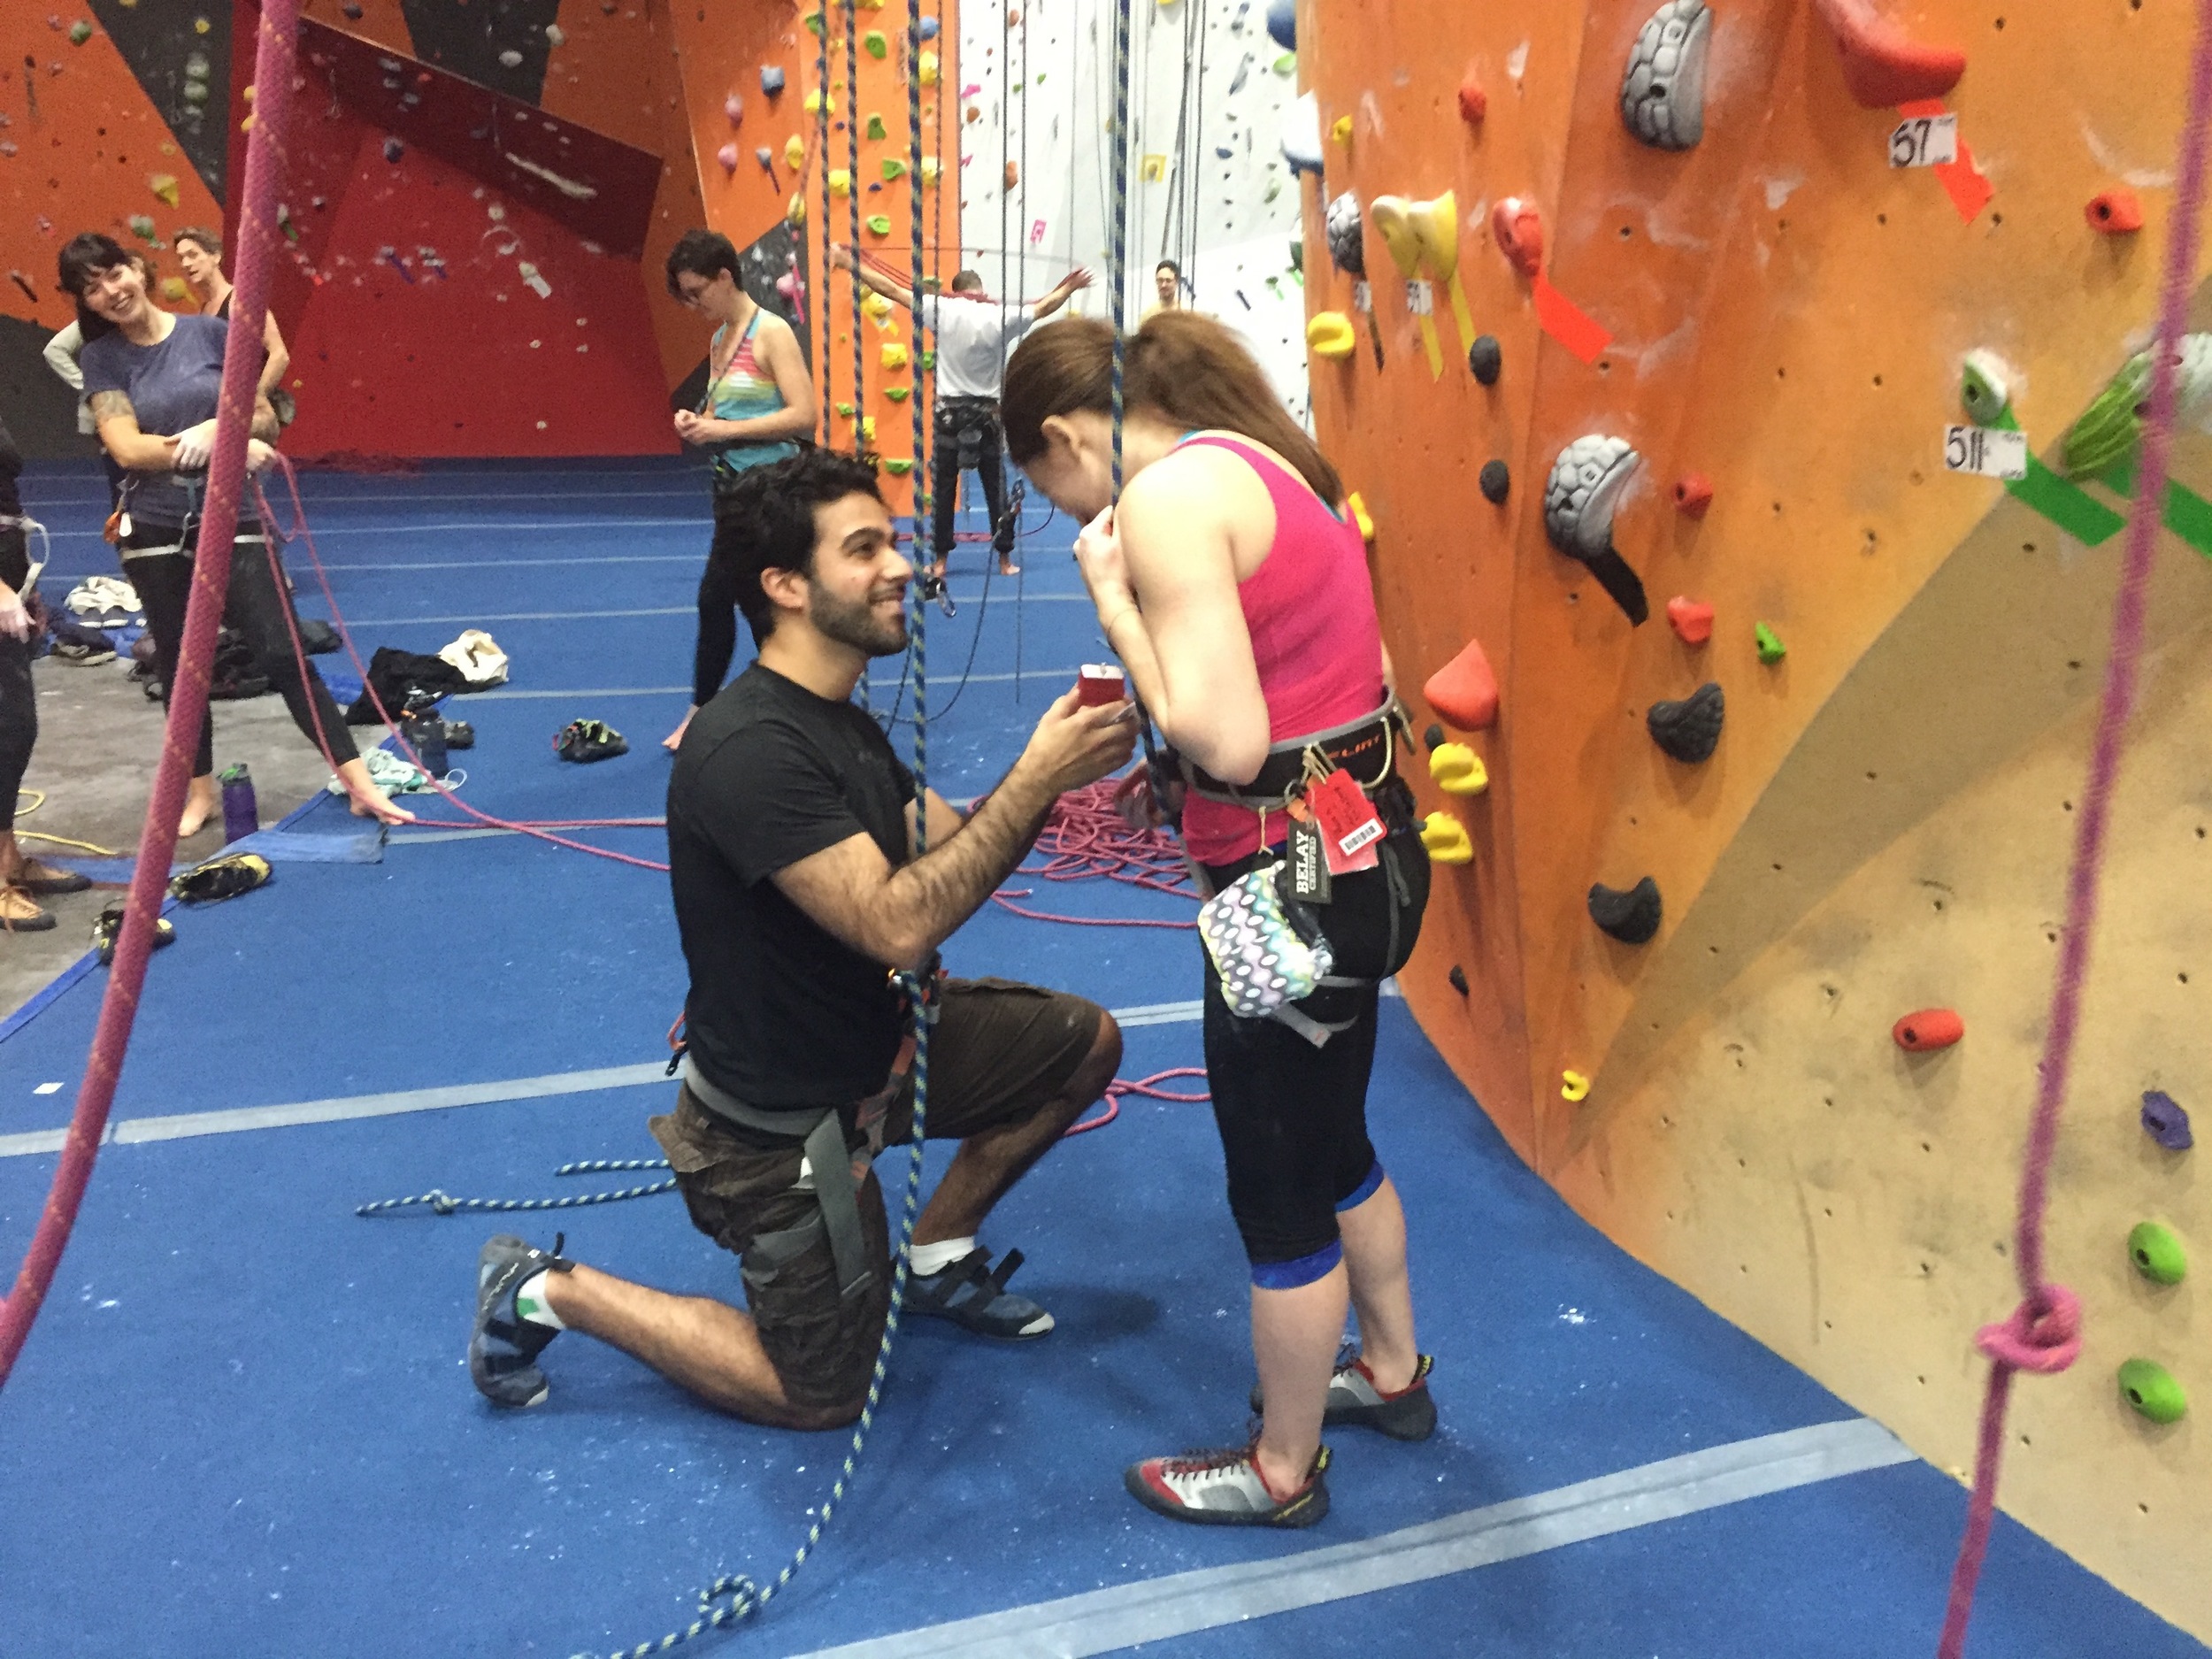  We wrapped up the year with a (surprise!) proposal. Two lovebirds, intertwined with ropes and sweet nothings, found themselves caught in a moment at the base of a toprope climb at The Cliffs at LIC. 